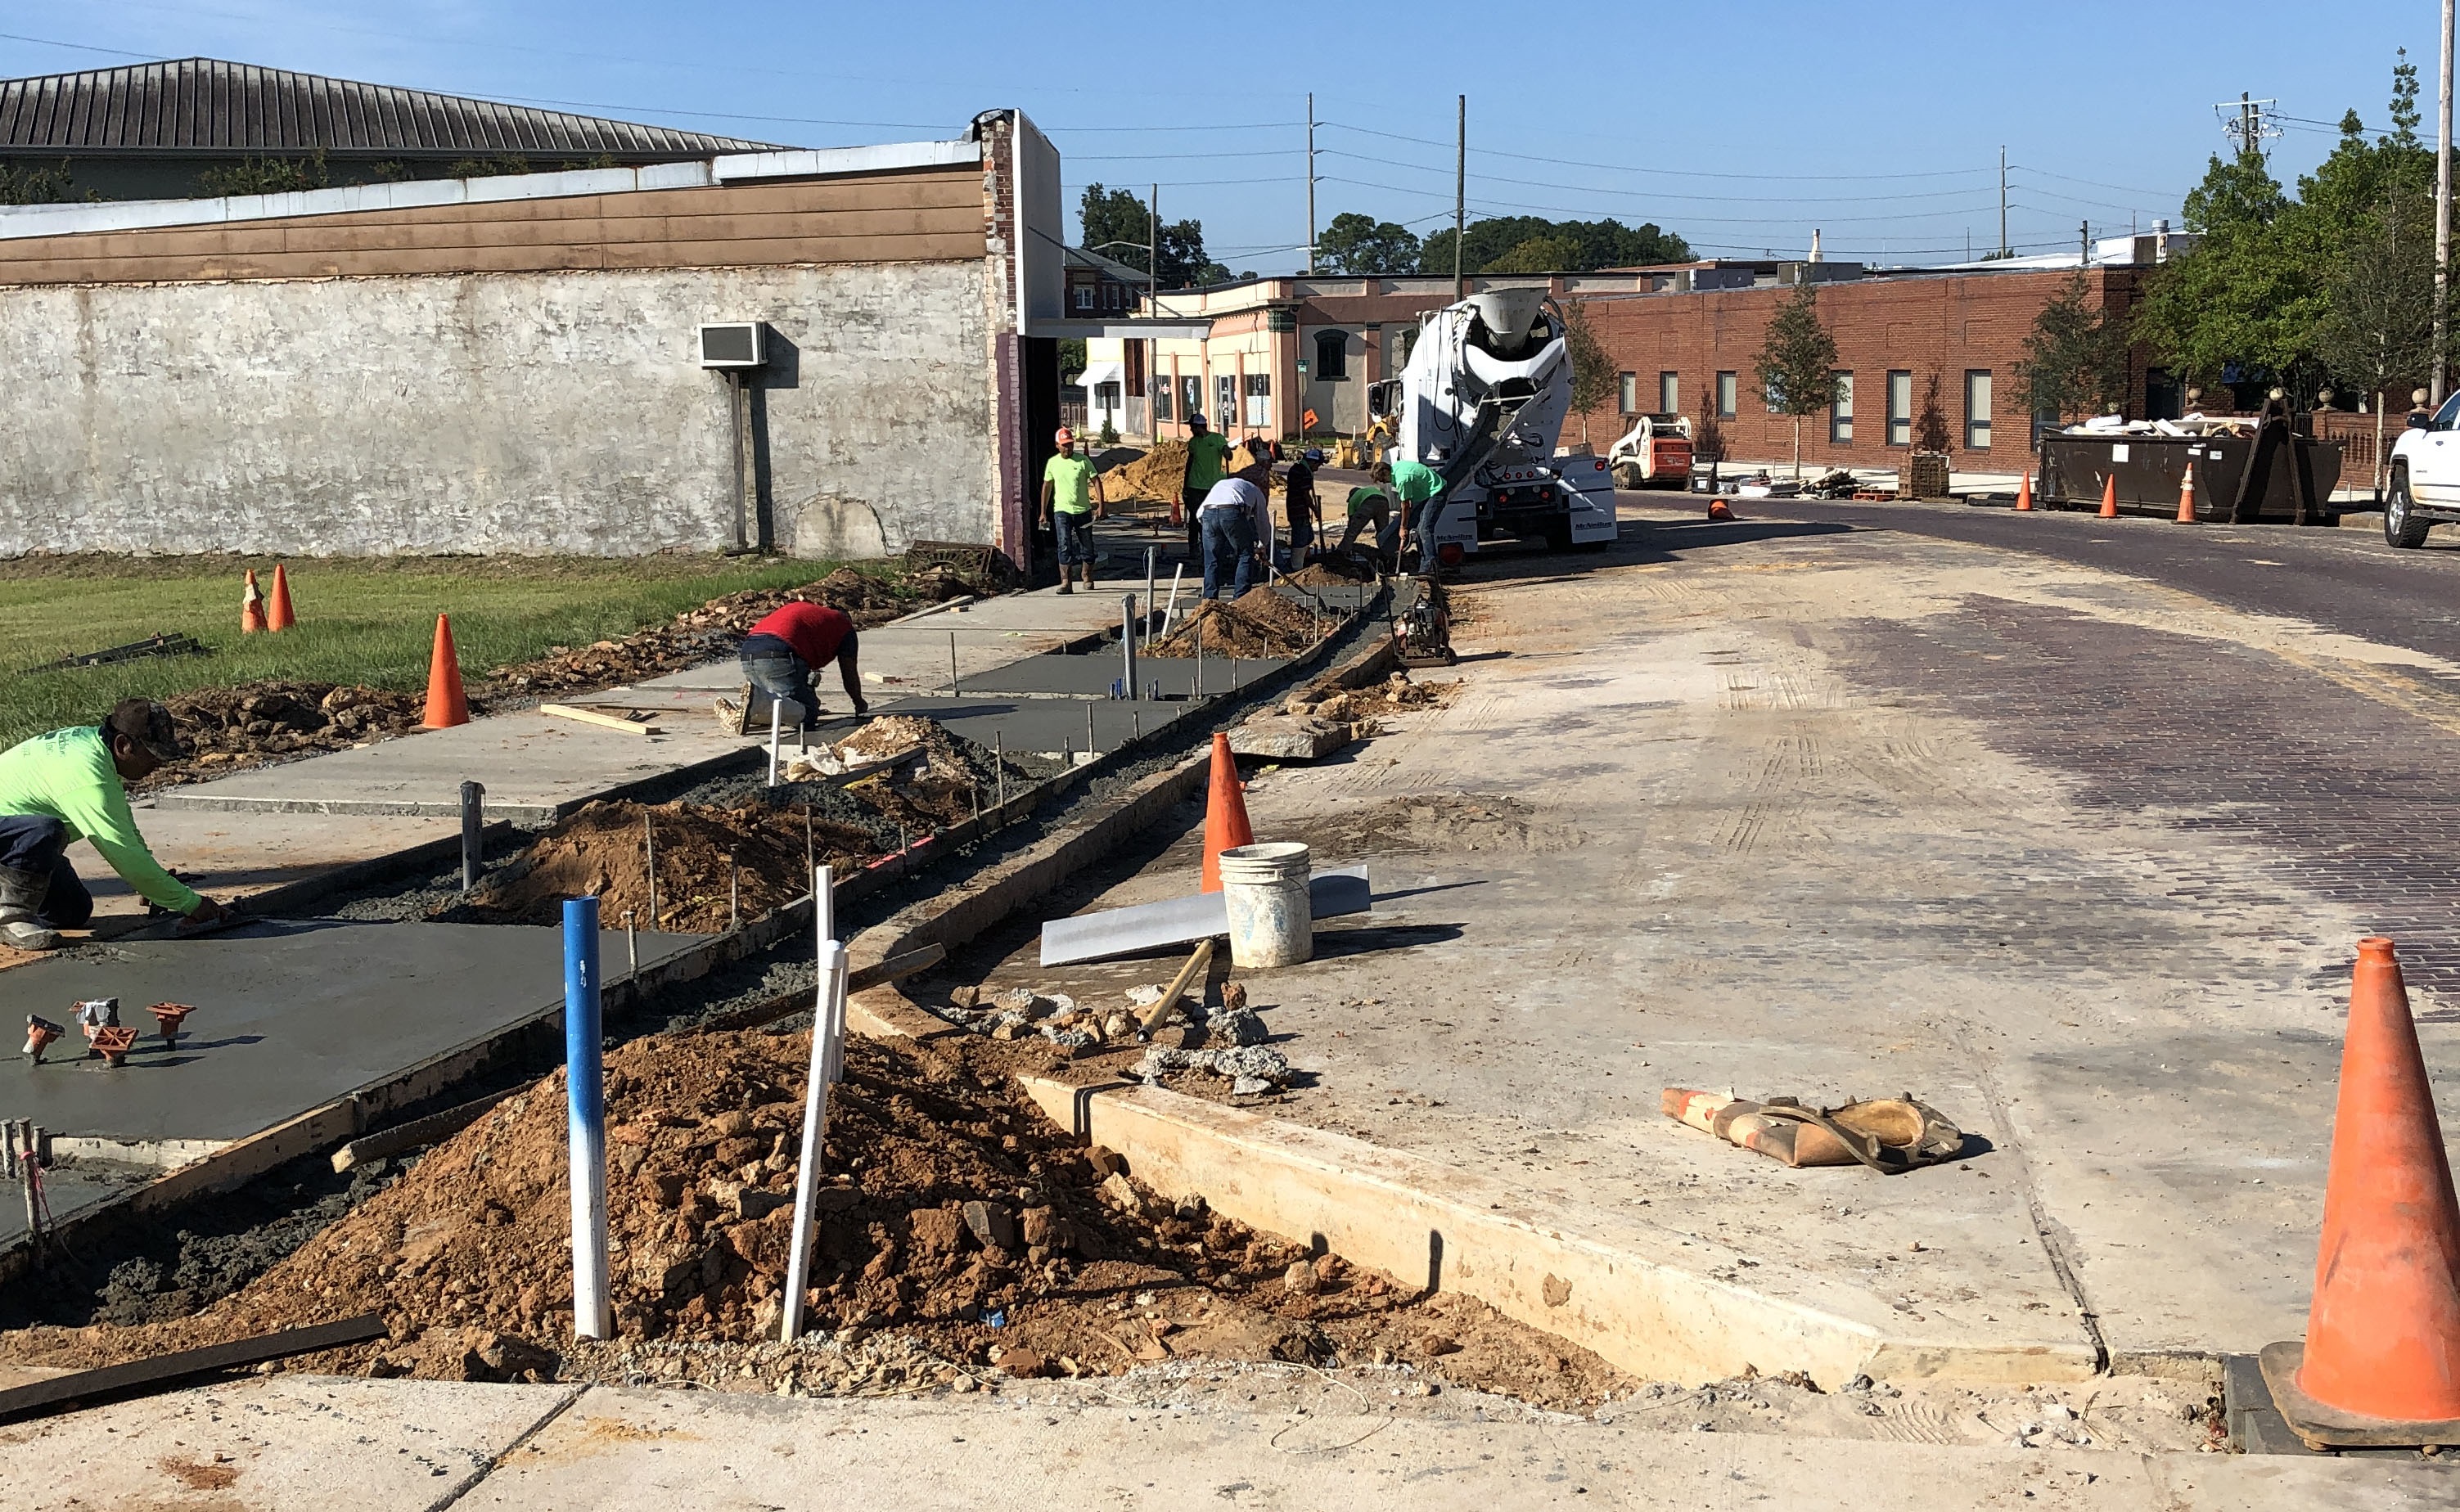 Sidewalk construction on the south side of the 300 block of West Jackson St.